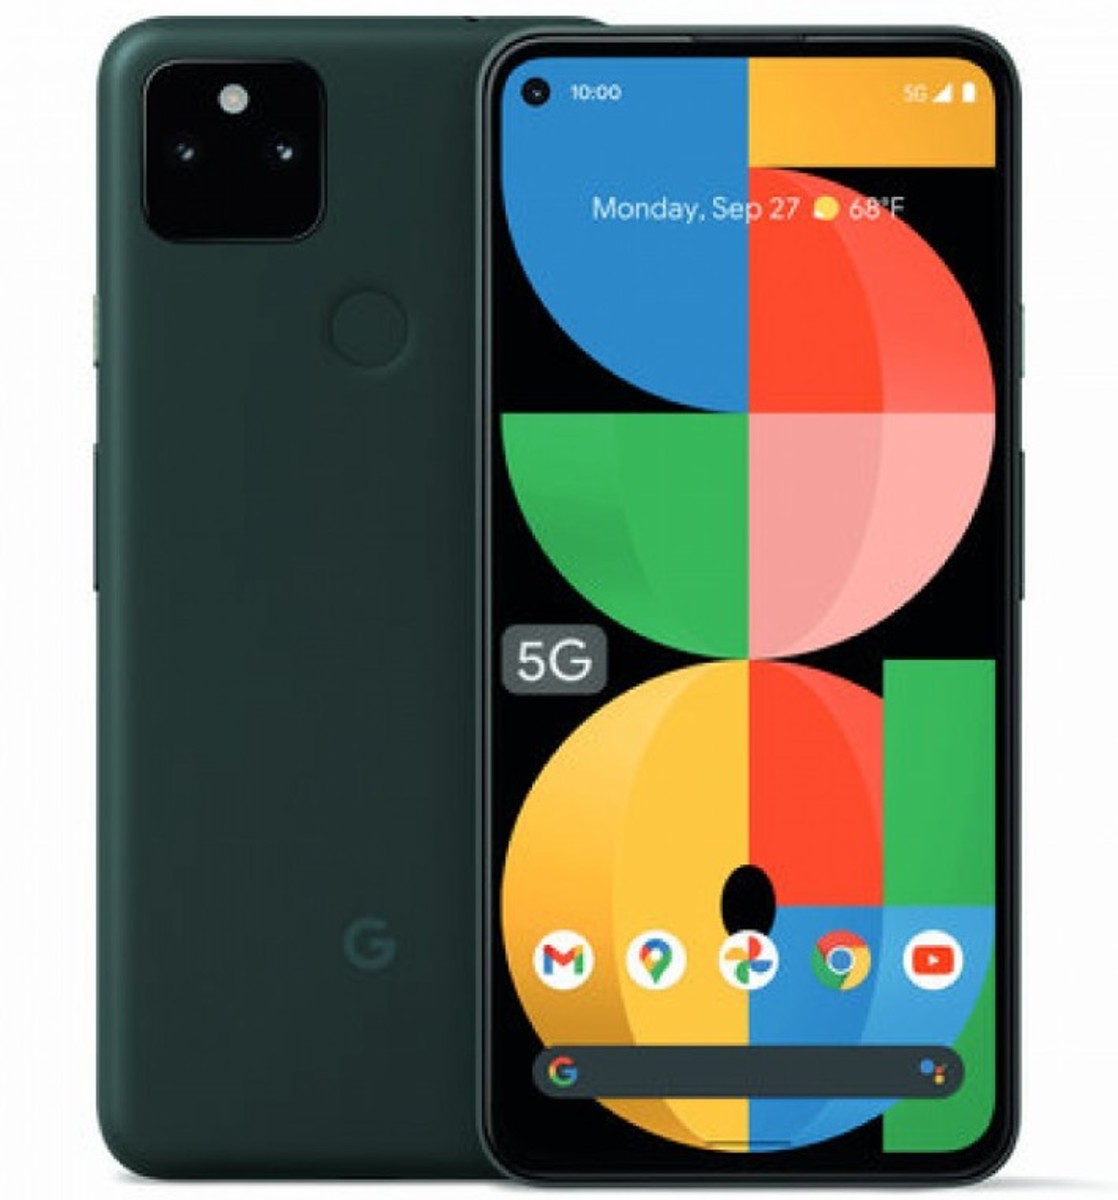 The Pixel 5A